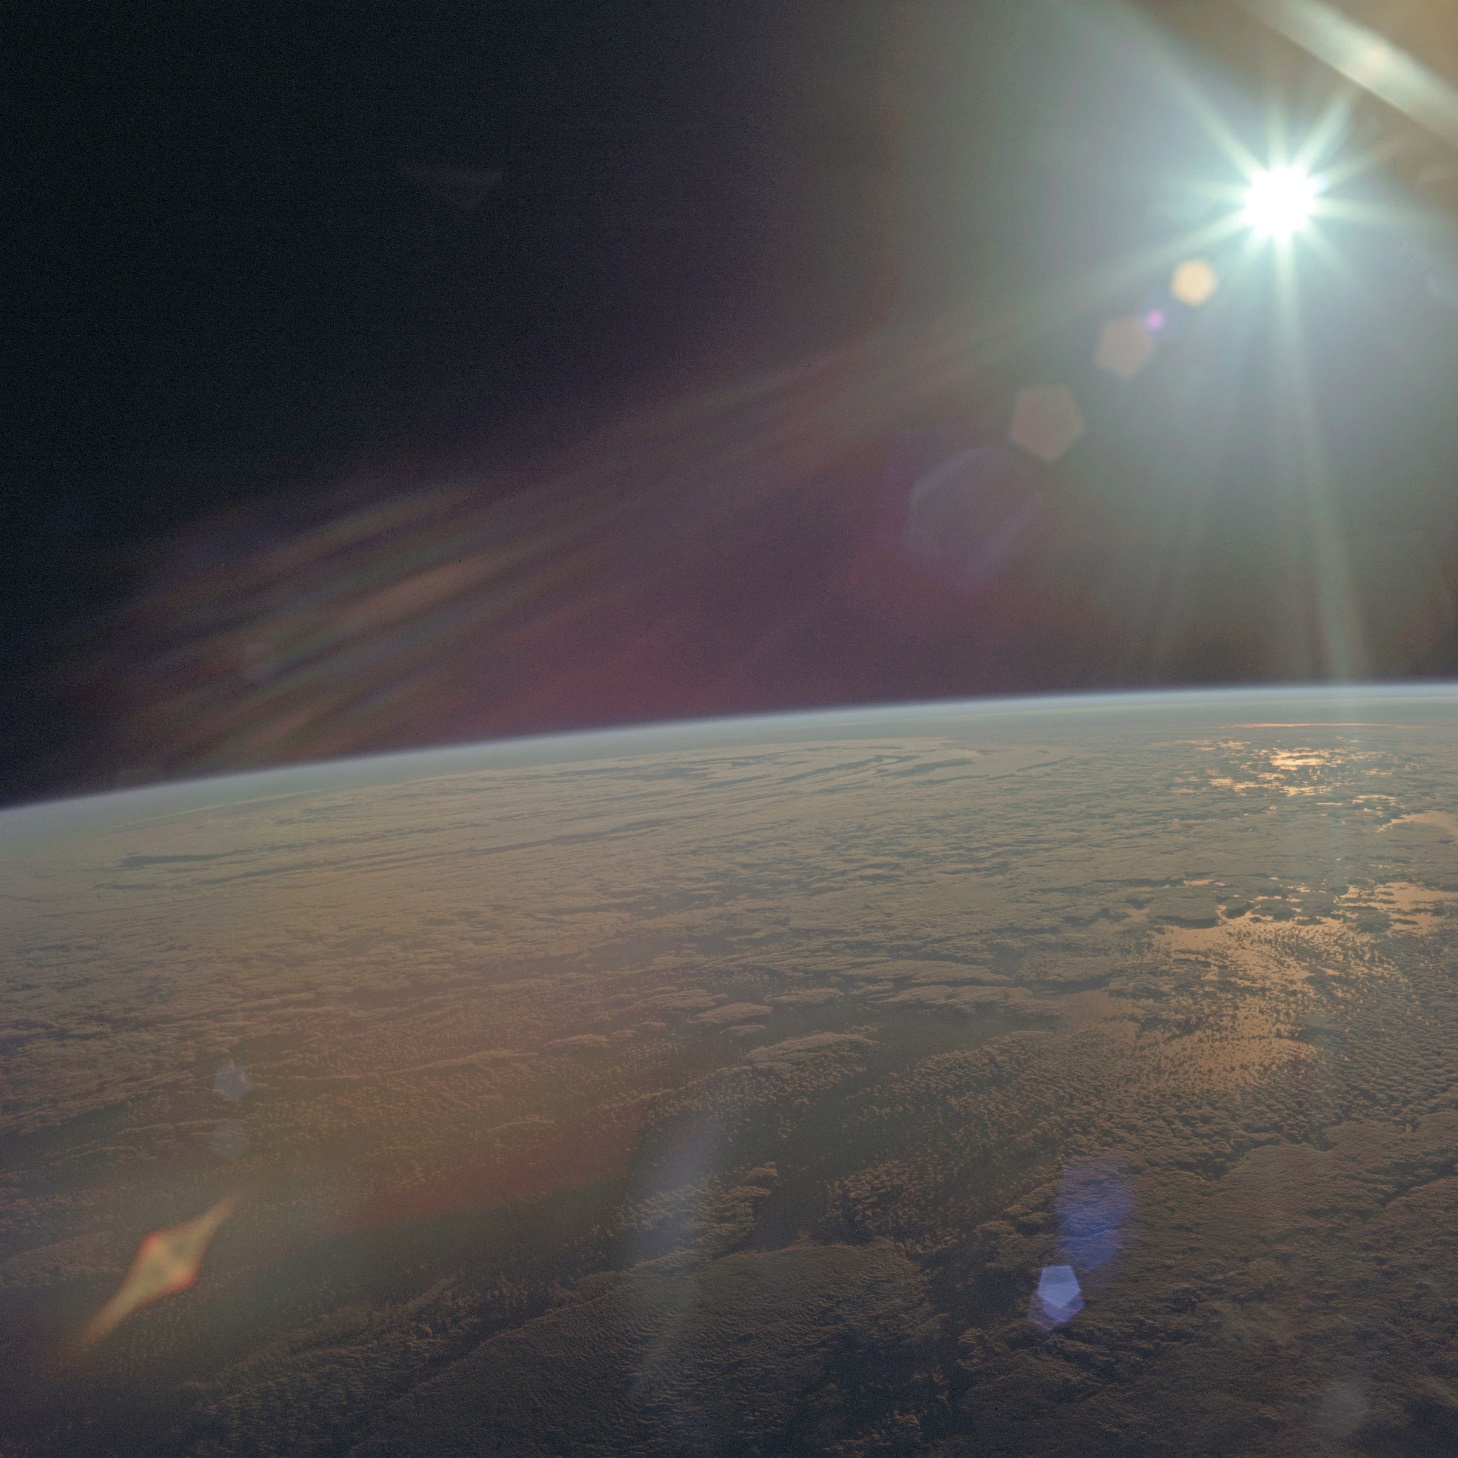 Earth limb with clouds Glare of Sun visible above the Earths horizon Image - photo 15